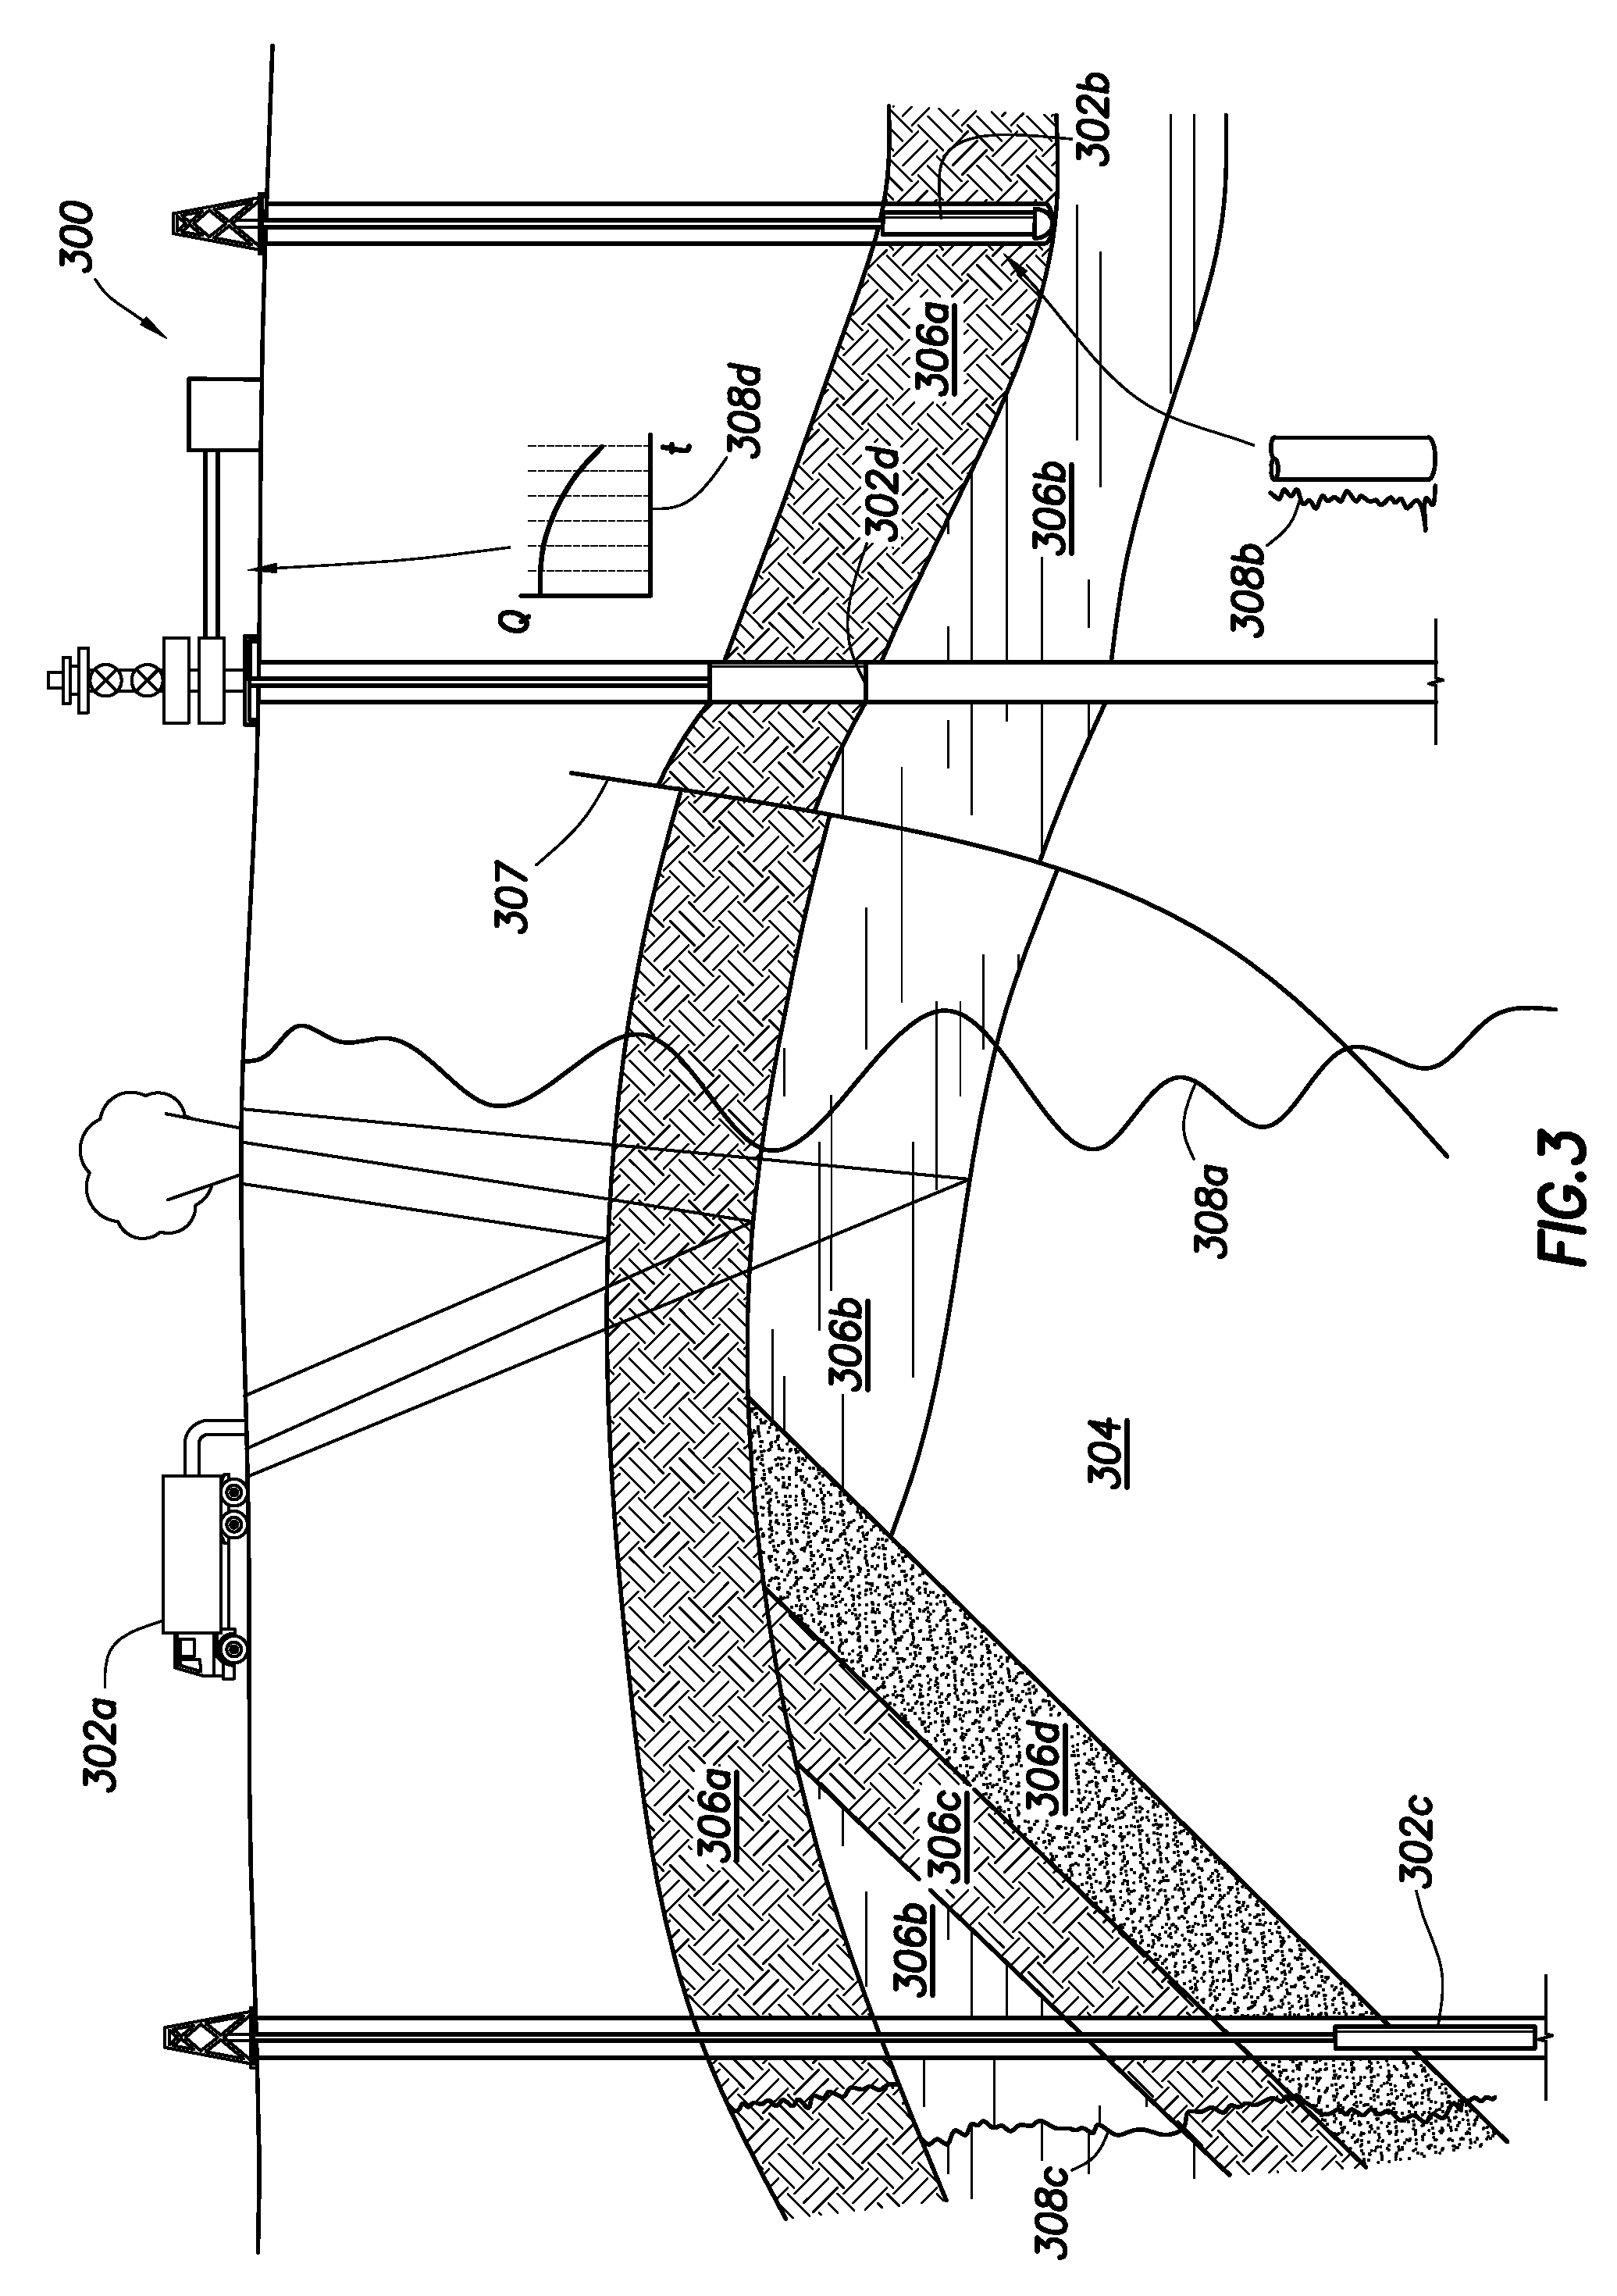 Apparatus, method and system for stochastic workflow in oilfield operations